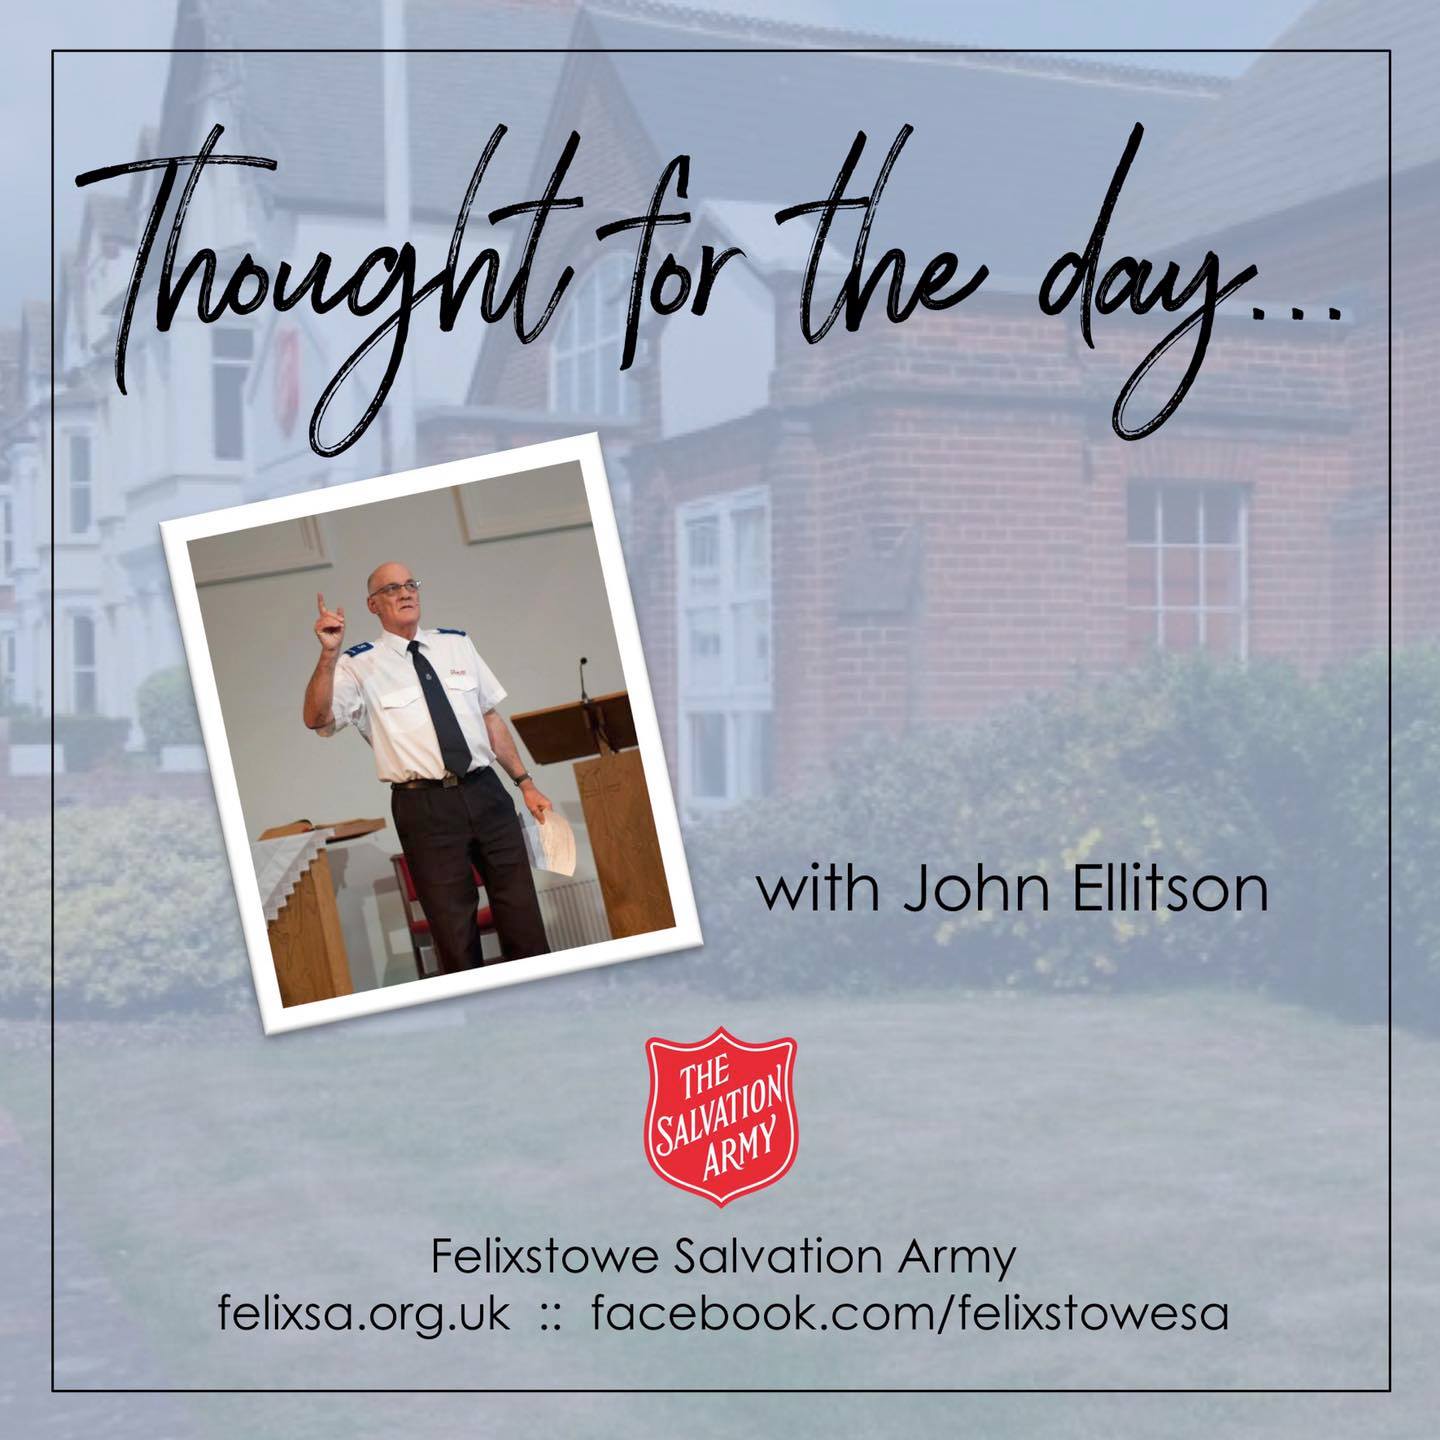 Thought for the Day with John Ellitson